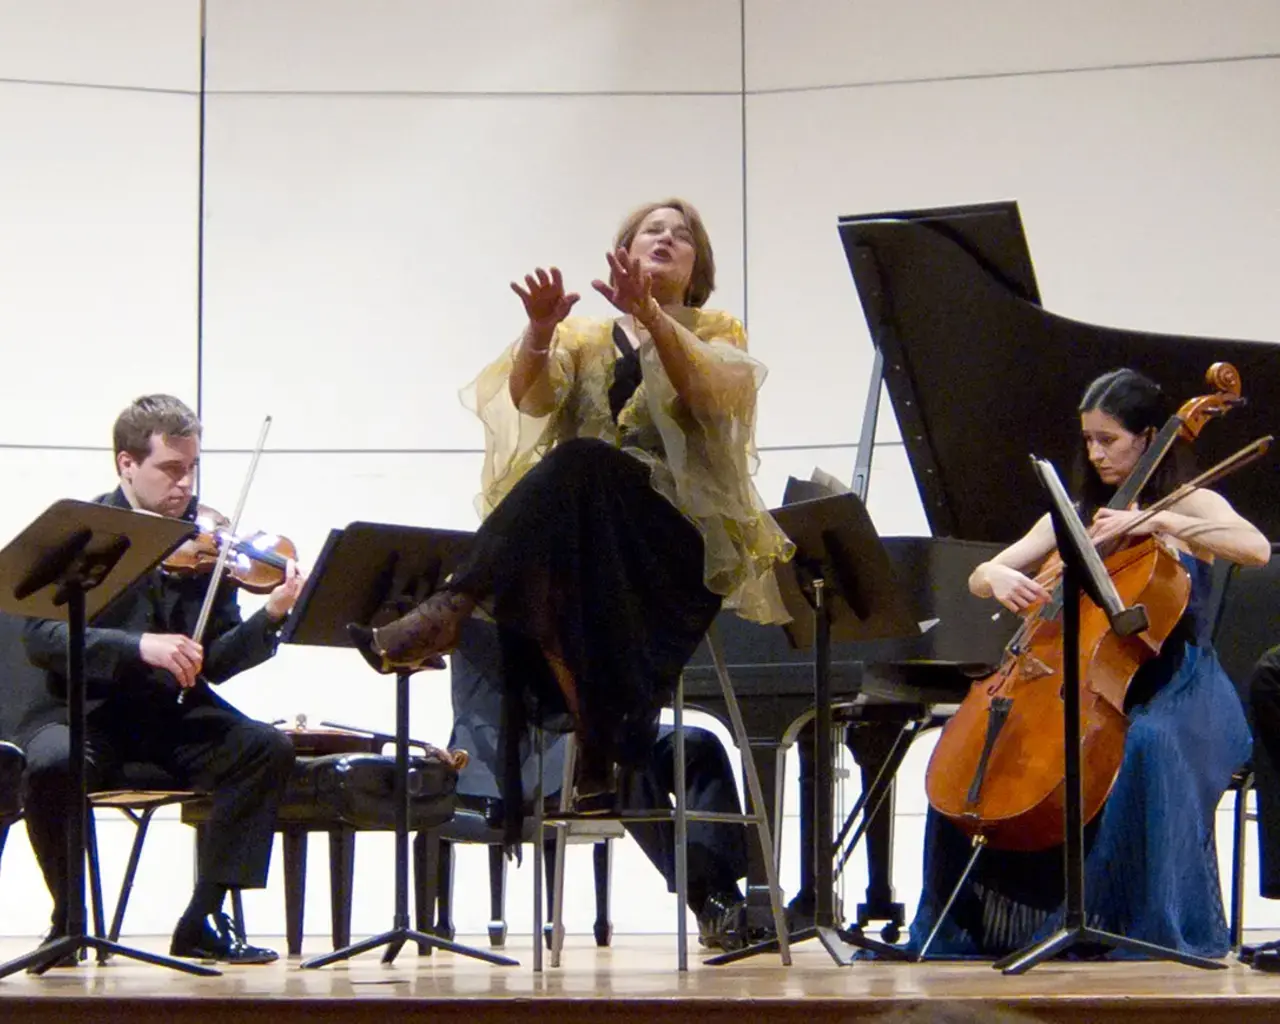 Soprano Lucy Shelton joins the Dolce Suono Ensemble in Schoenberg&#39;s Pierrot lunaire, February 2012, as part of Mahler 100/Schoenberg 60. Left to right: Mimi Stillman, flute; Marc Rovetti, violin; Charles Abramovic, piano; Lucy Shelton, soprano; Yumi Kendall, cello; Paul Demers, clarinet. Photo by Donna Higgins.